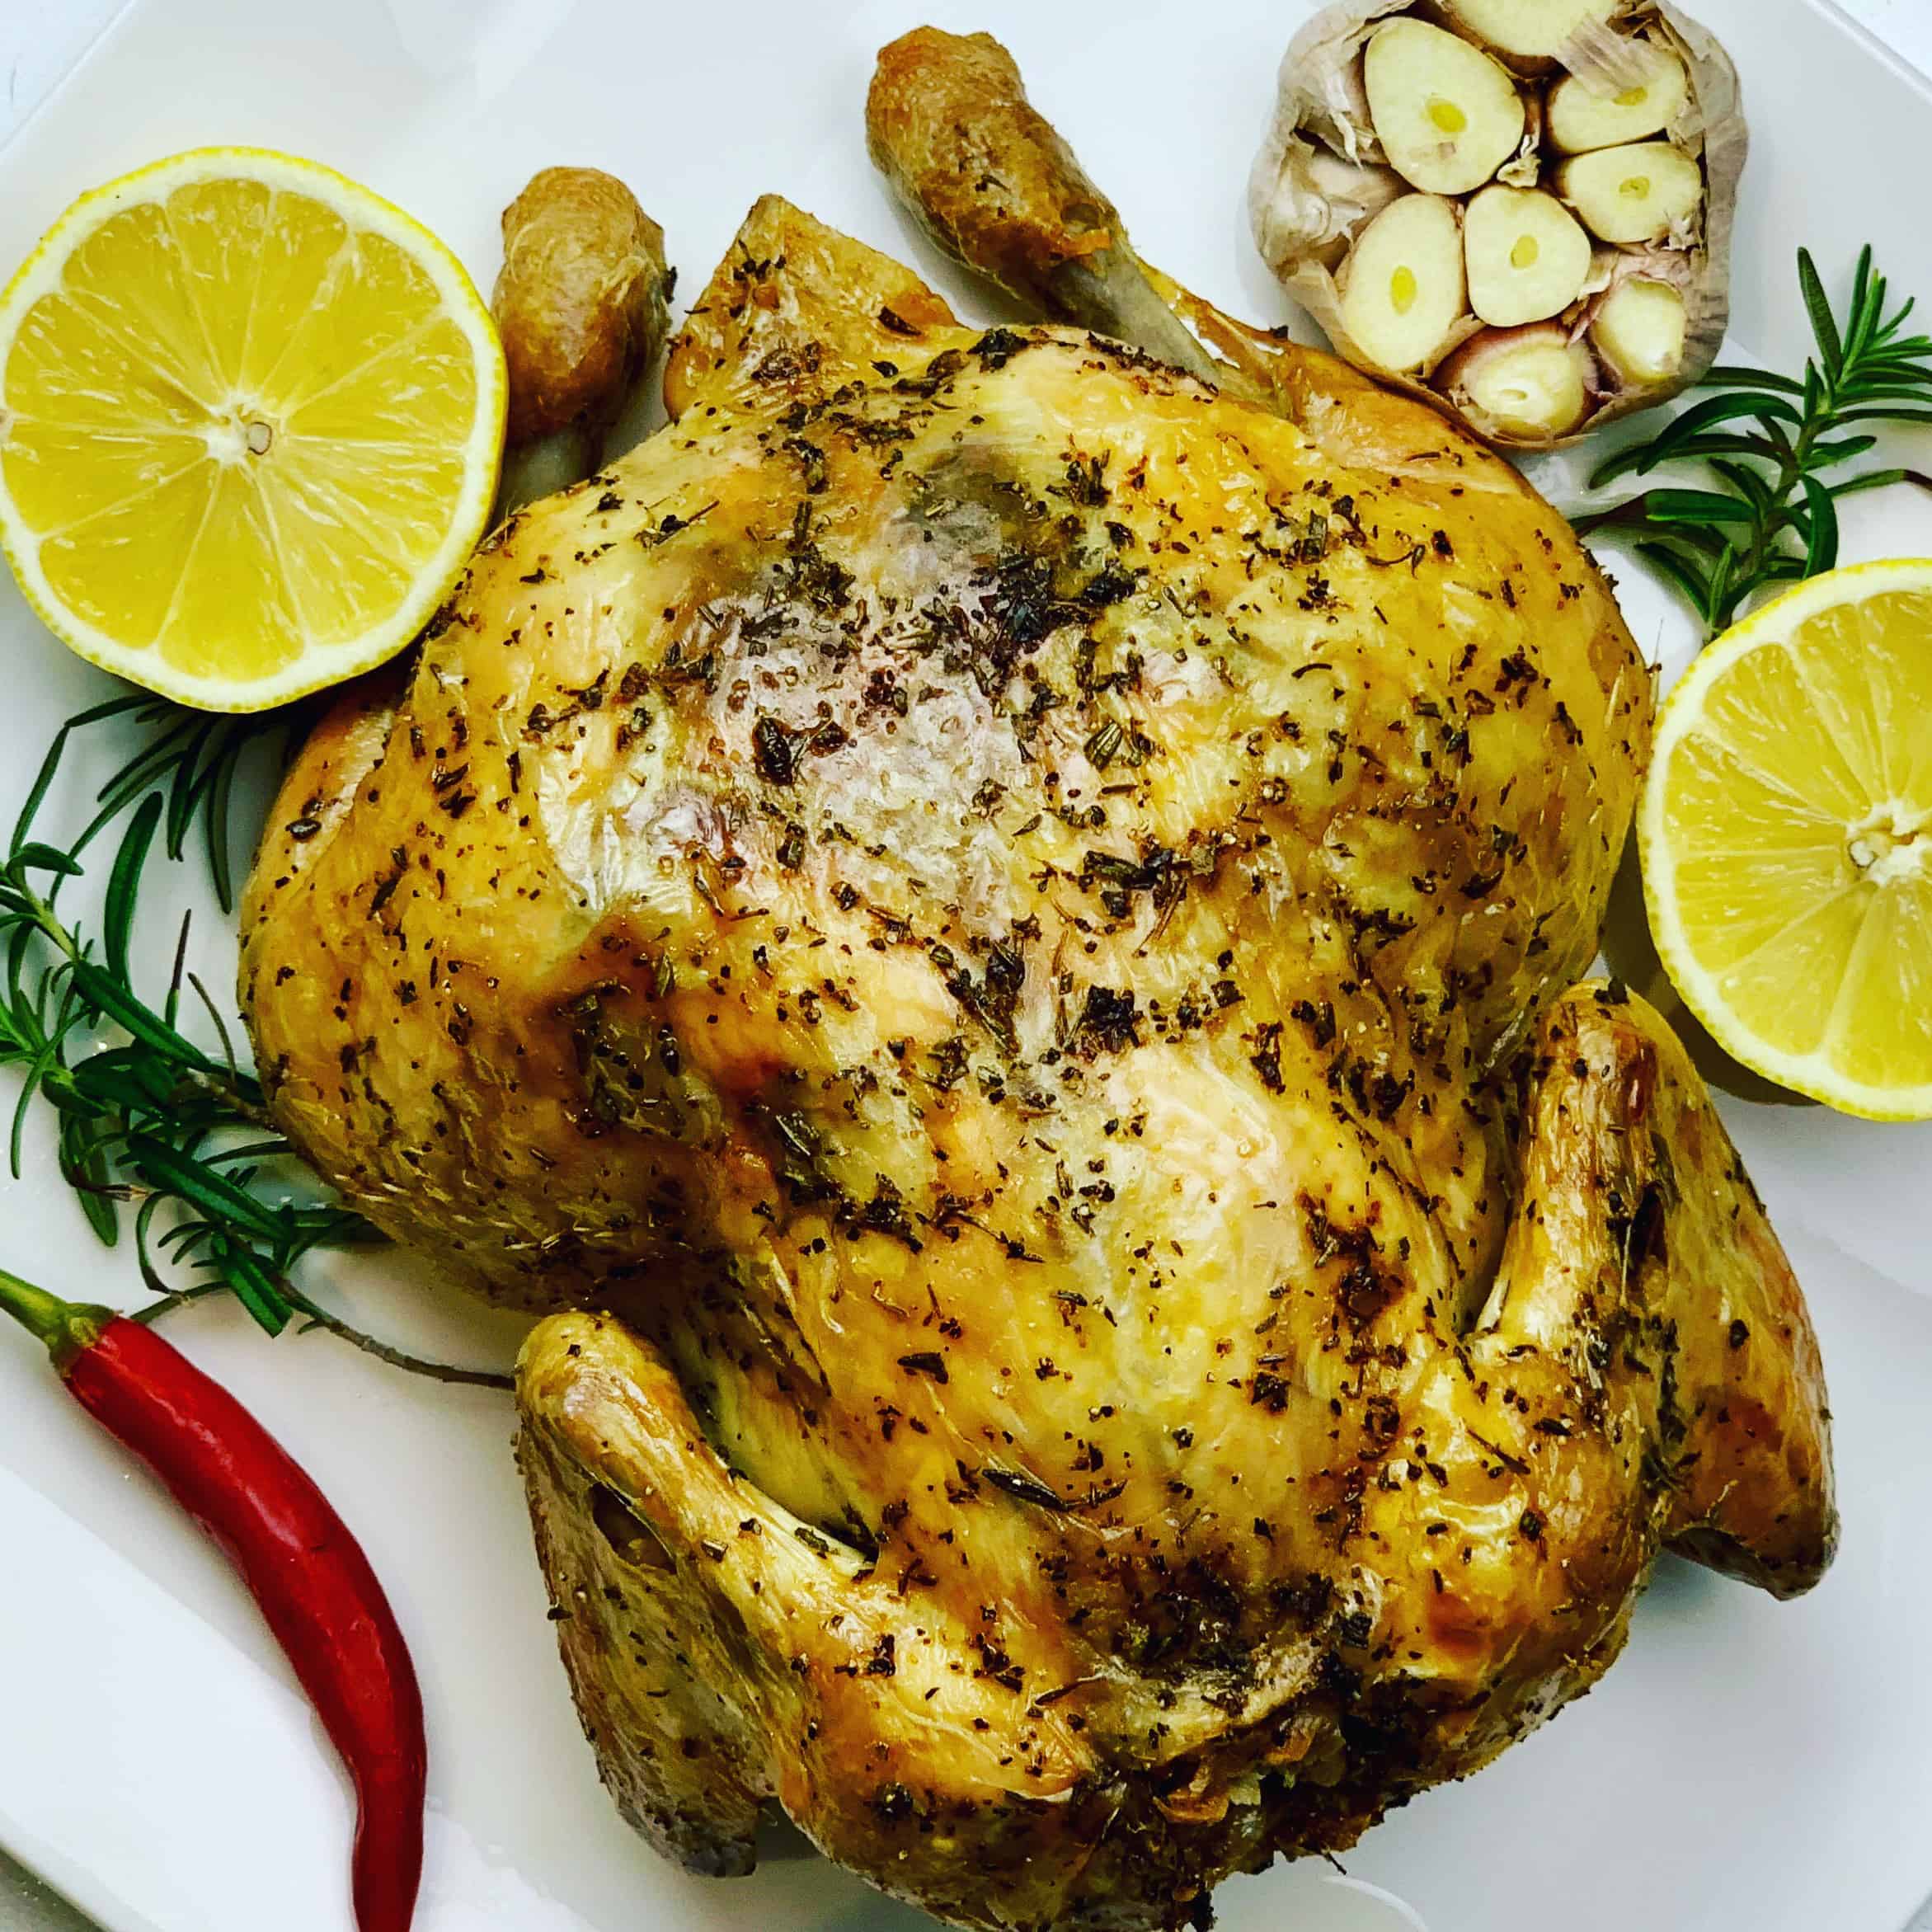 Juicy Whole Roasted Chicken, stuffed with lemon, garlic and rosemary. You won't go wrong with this easy chicken recipe that's baked upside down for maximum flavor. Winner Winner Chicken Dinner!